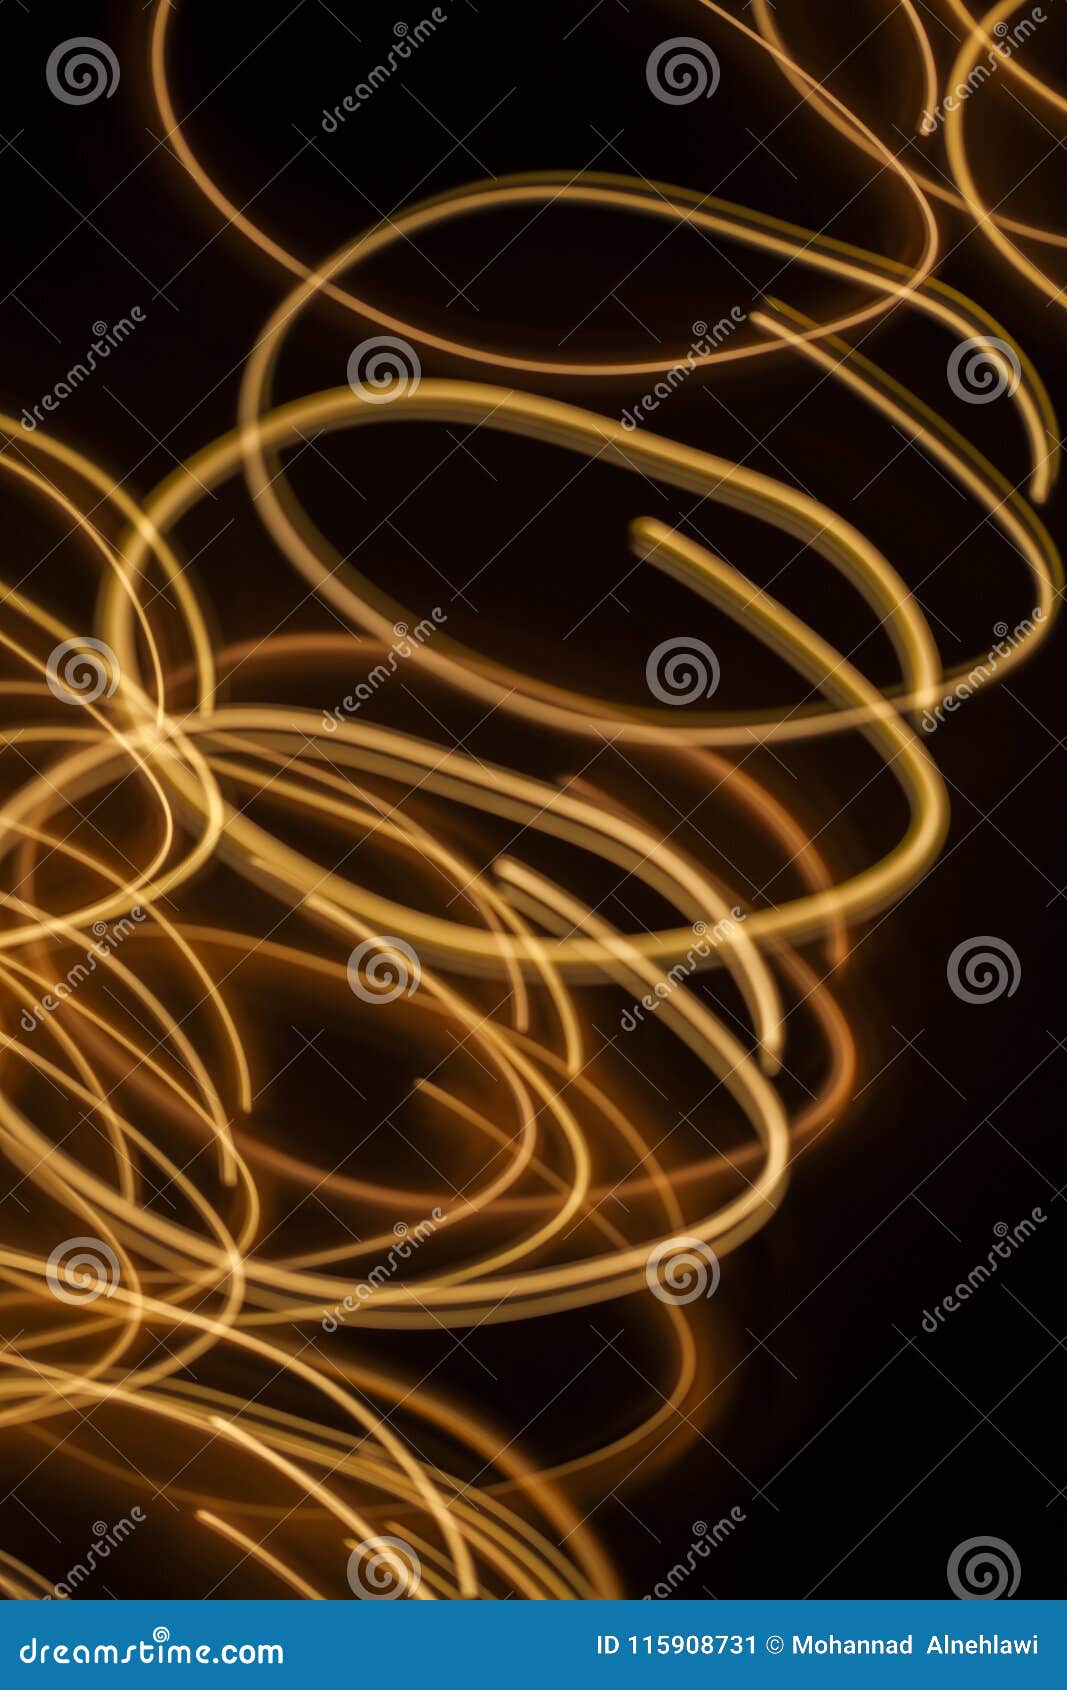 Swirl Sparkling Glowing Lines Background Stock Image - Image of glowing ...